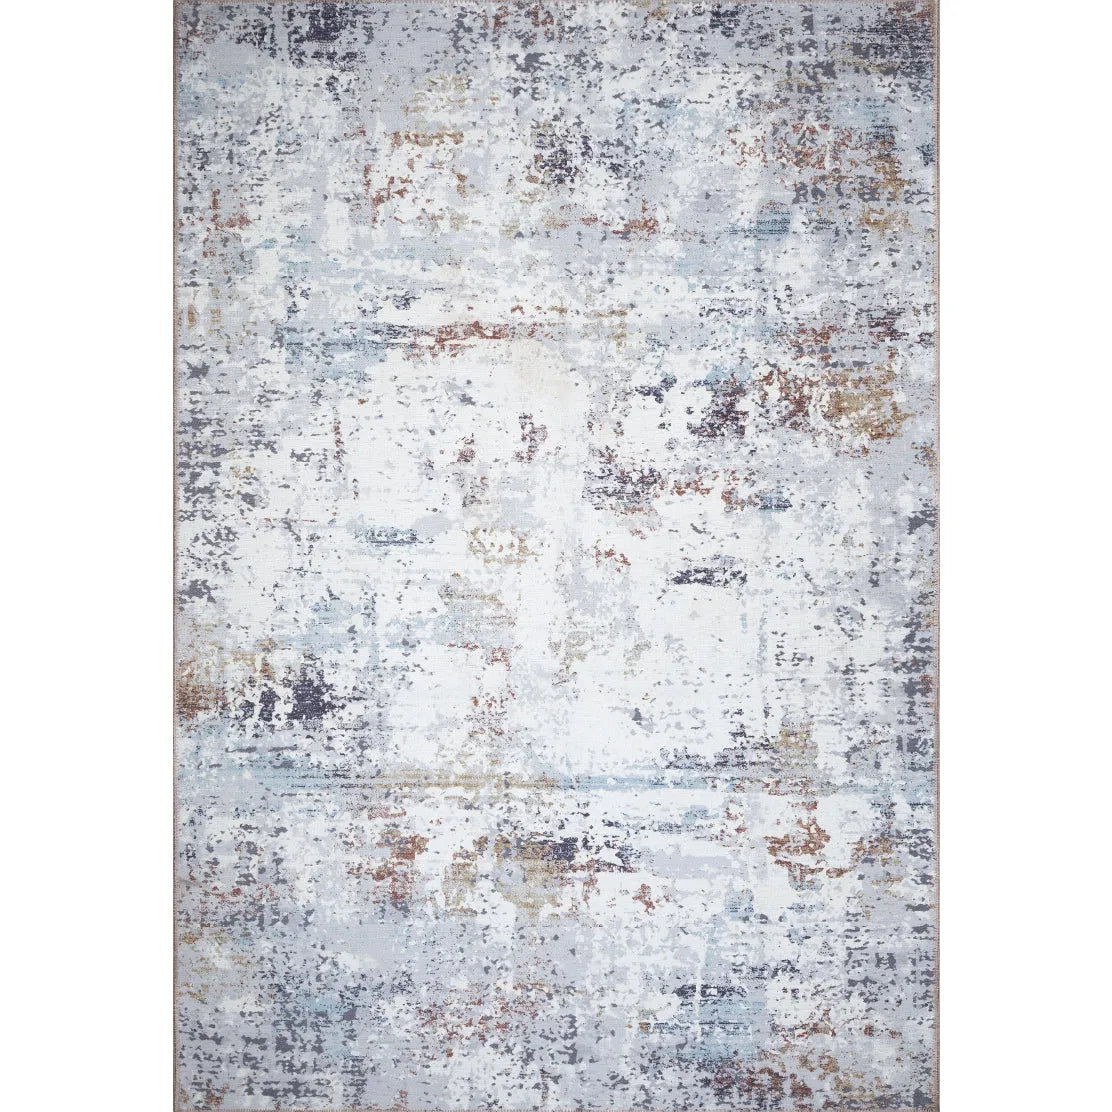 /products/pamuk-machine-washable-area-rug-gray-multicolor